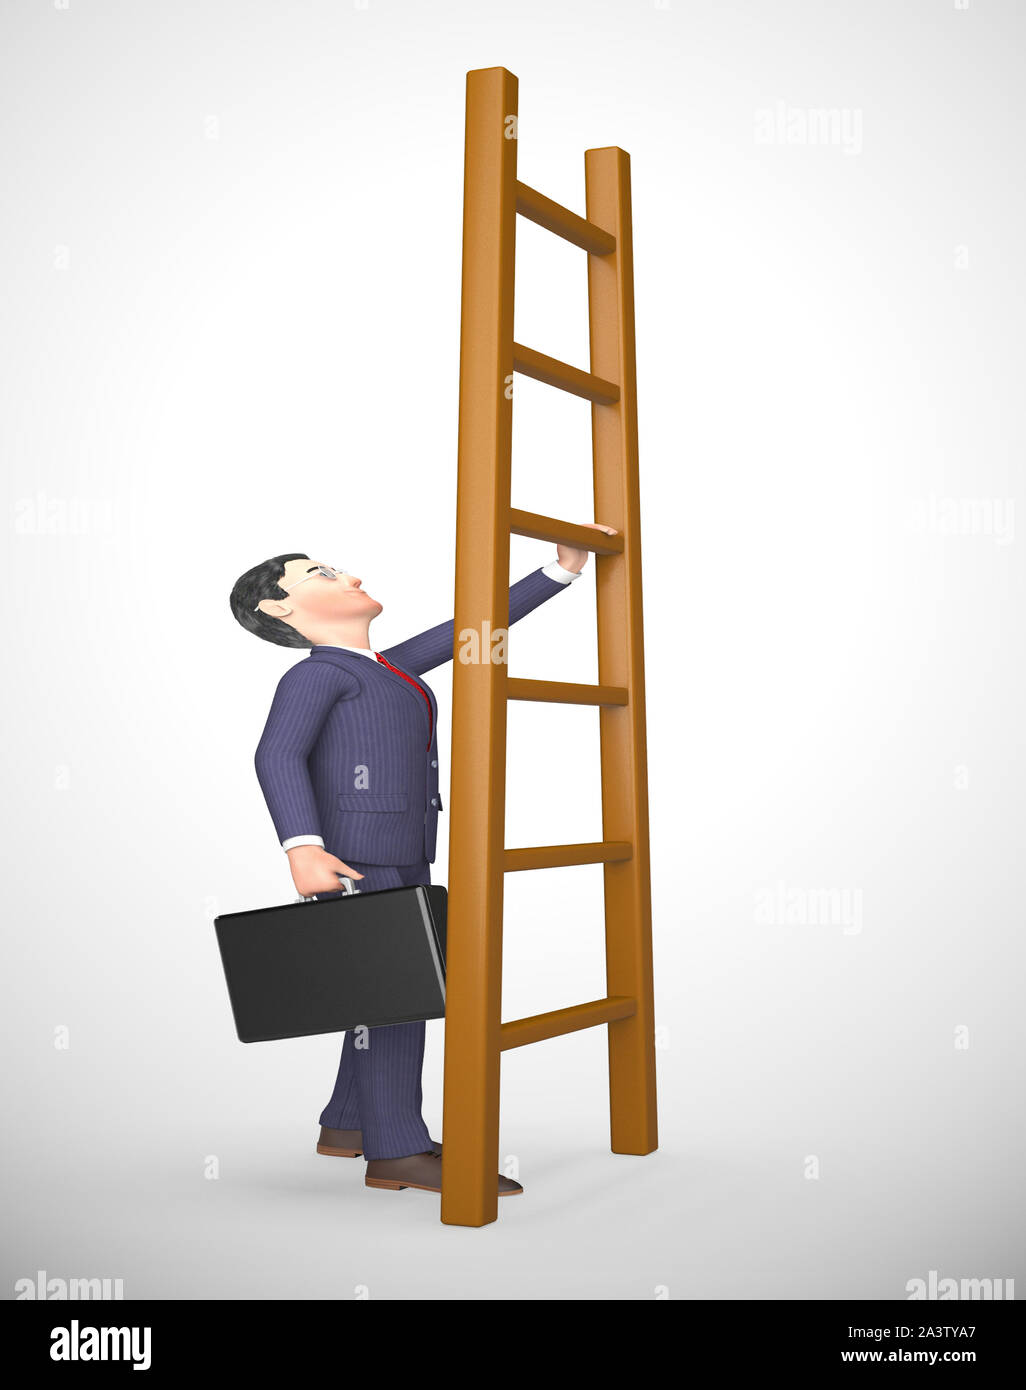 Ladder to success concept icon means ambitious leader desiring goals. Climbing to successful achievement - 3d illustration Stock Photo